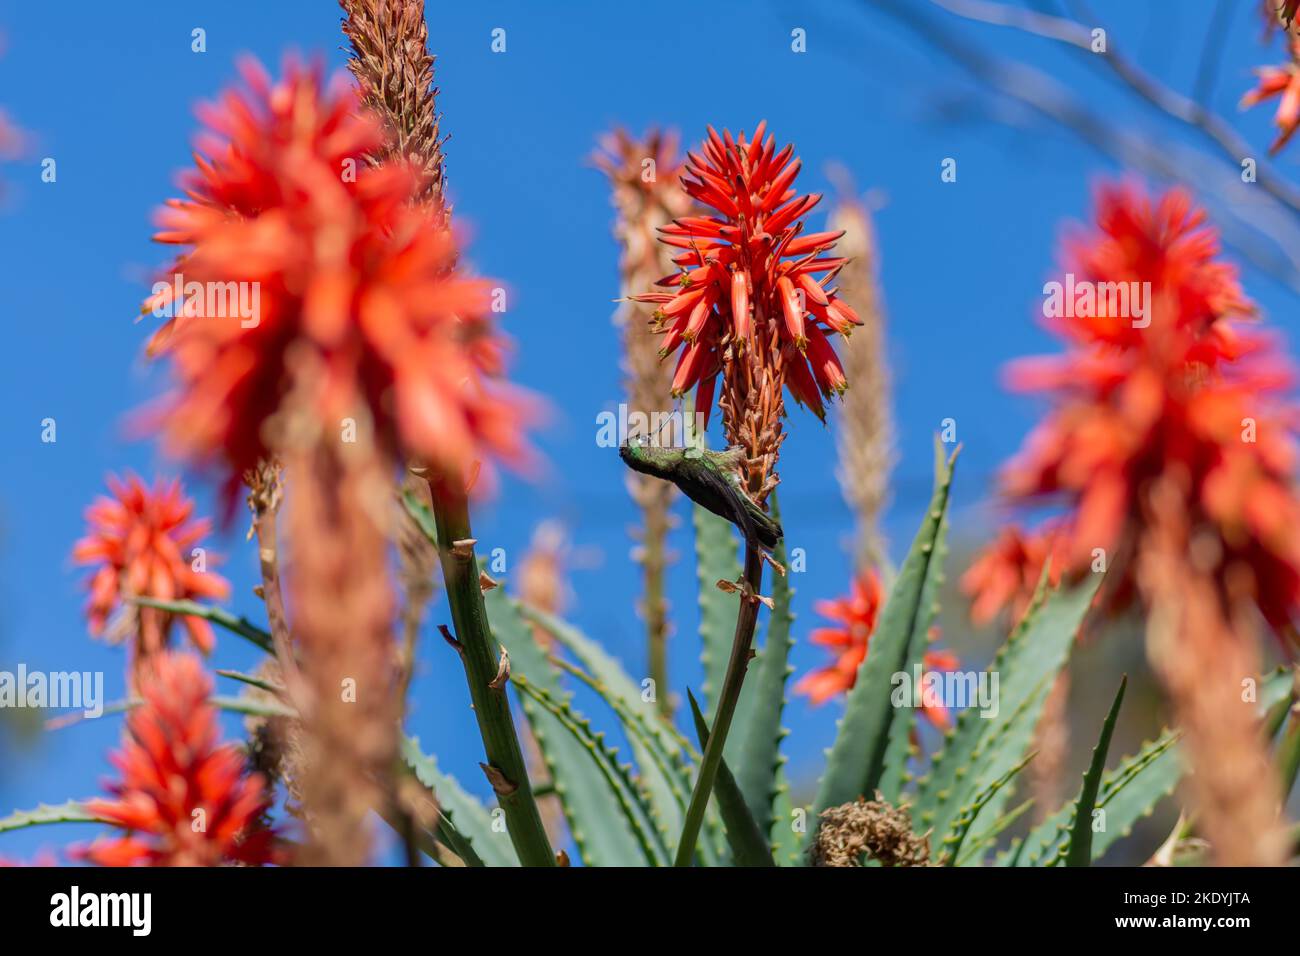 The view of Candelabra aloes blooming before the blue sky in the background Stock Photo